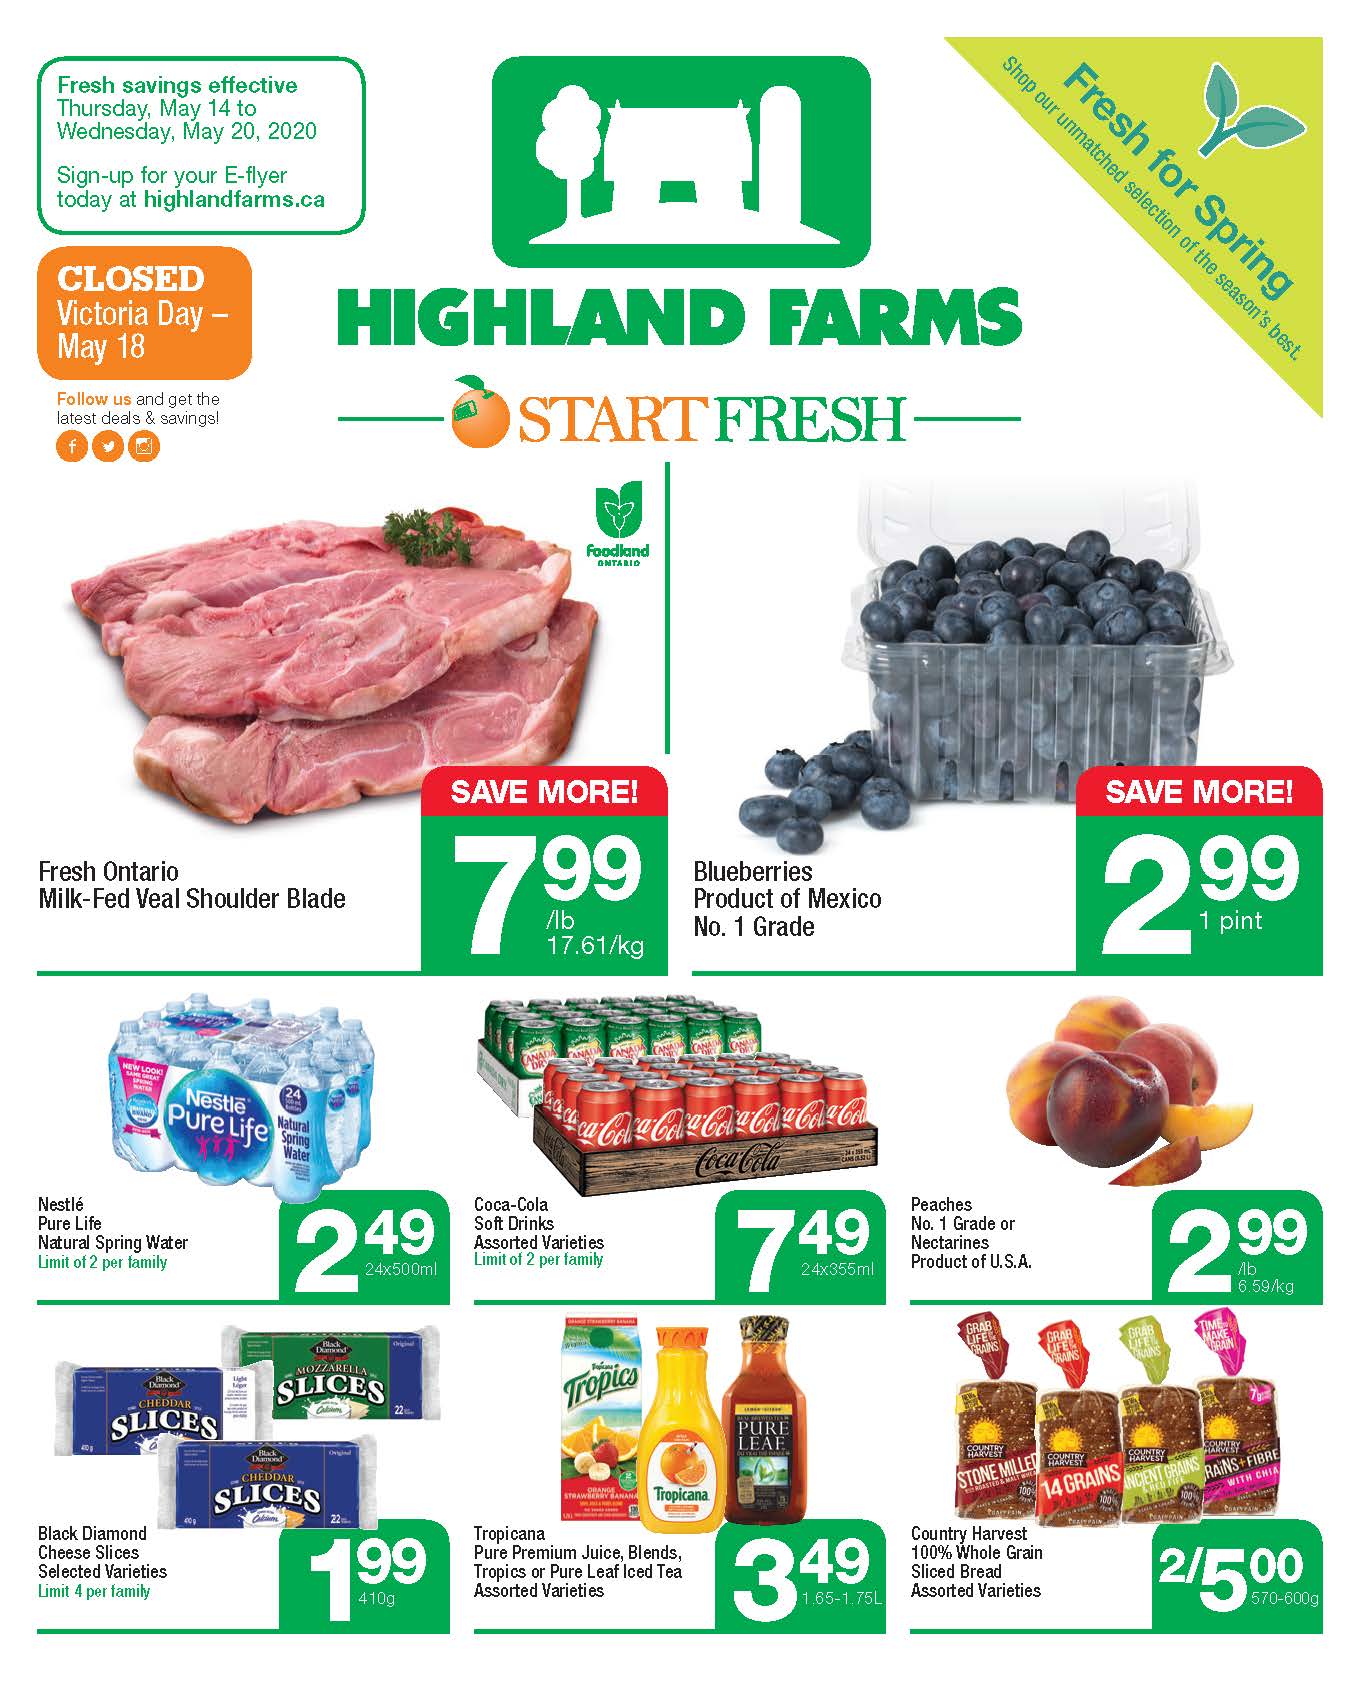 highland-farms-flyer-wednesday-may-13-2020-2020-5-13